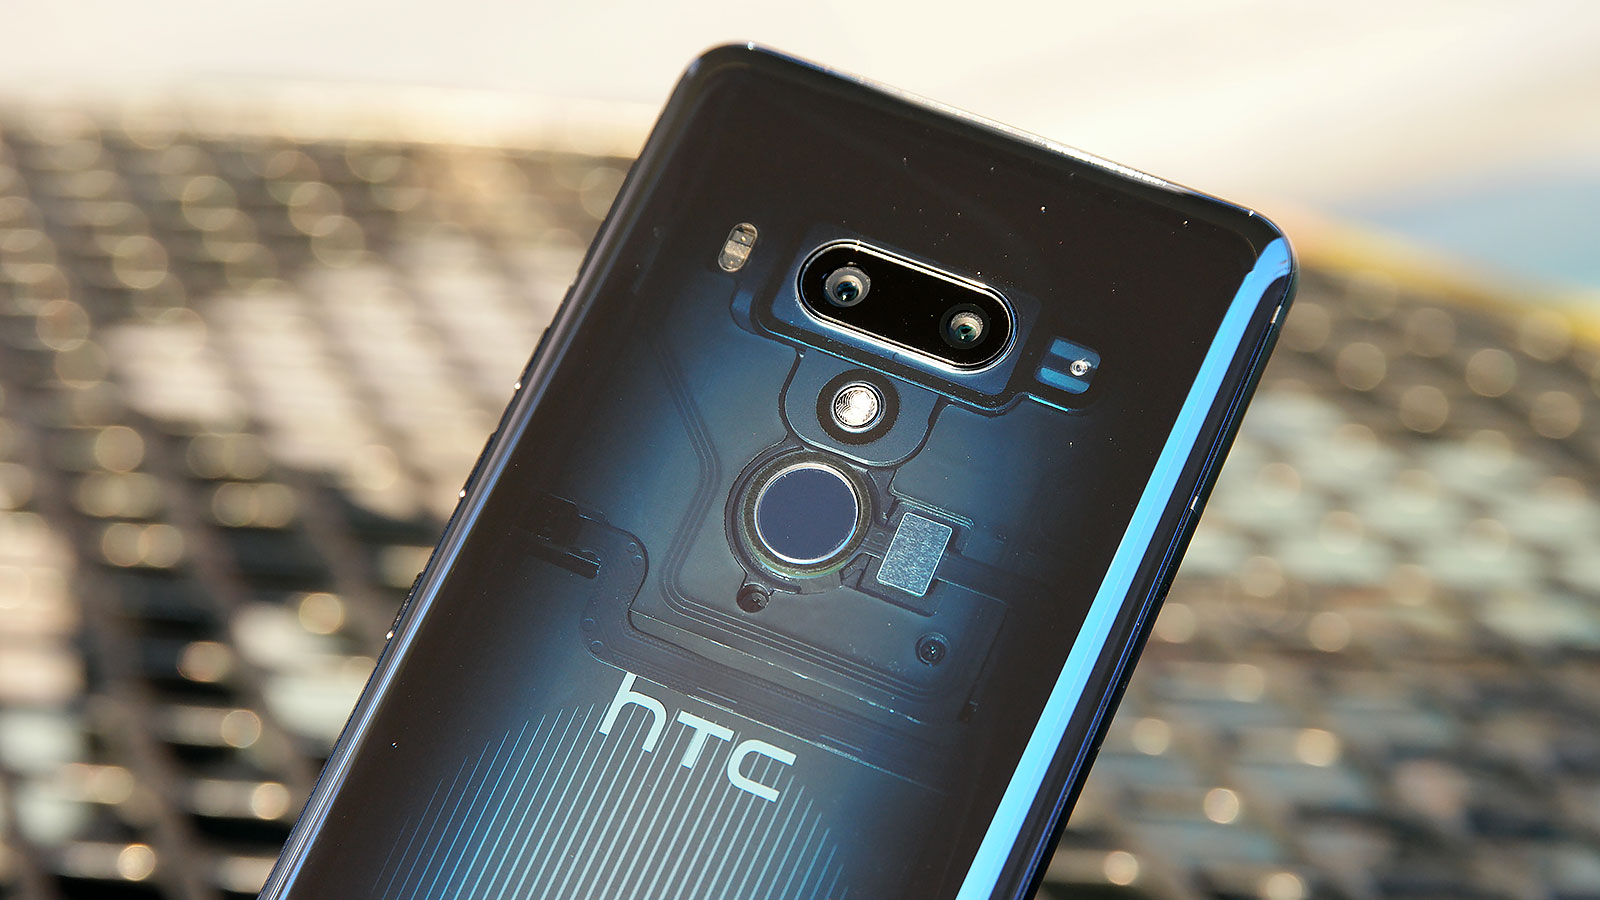 I Really Hope HTC Doesn’t Go Out Like This